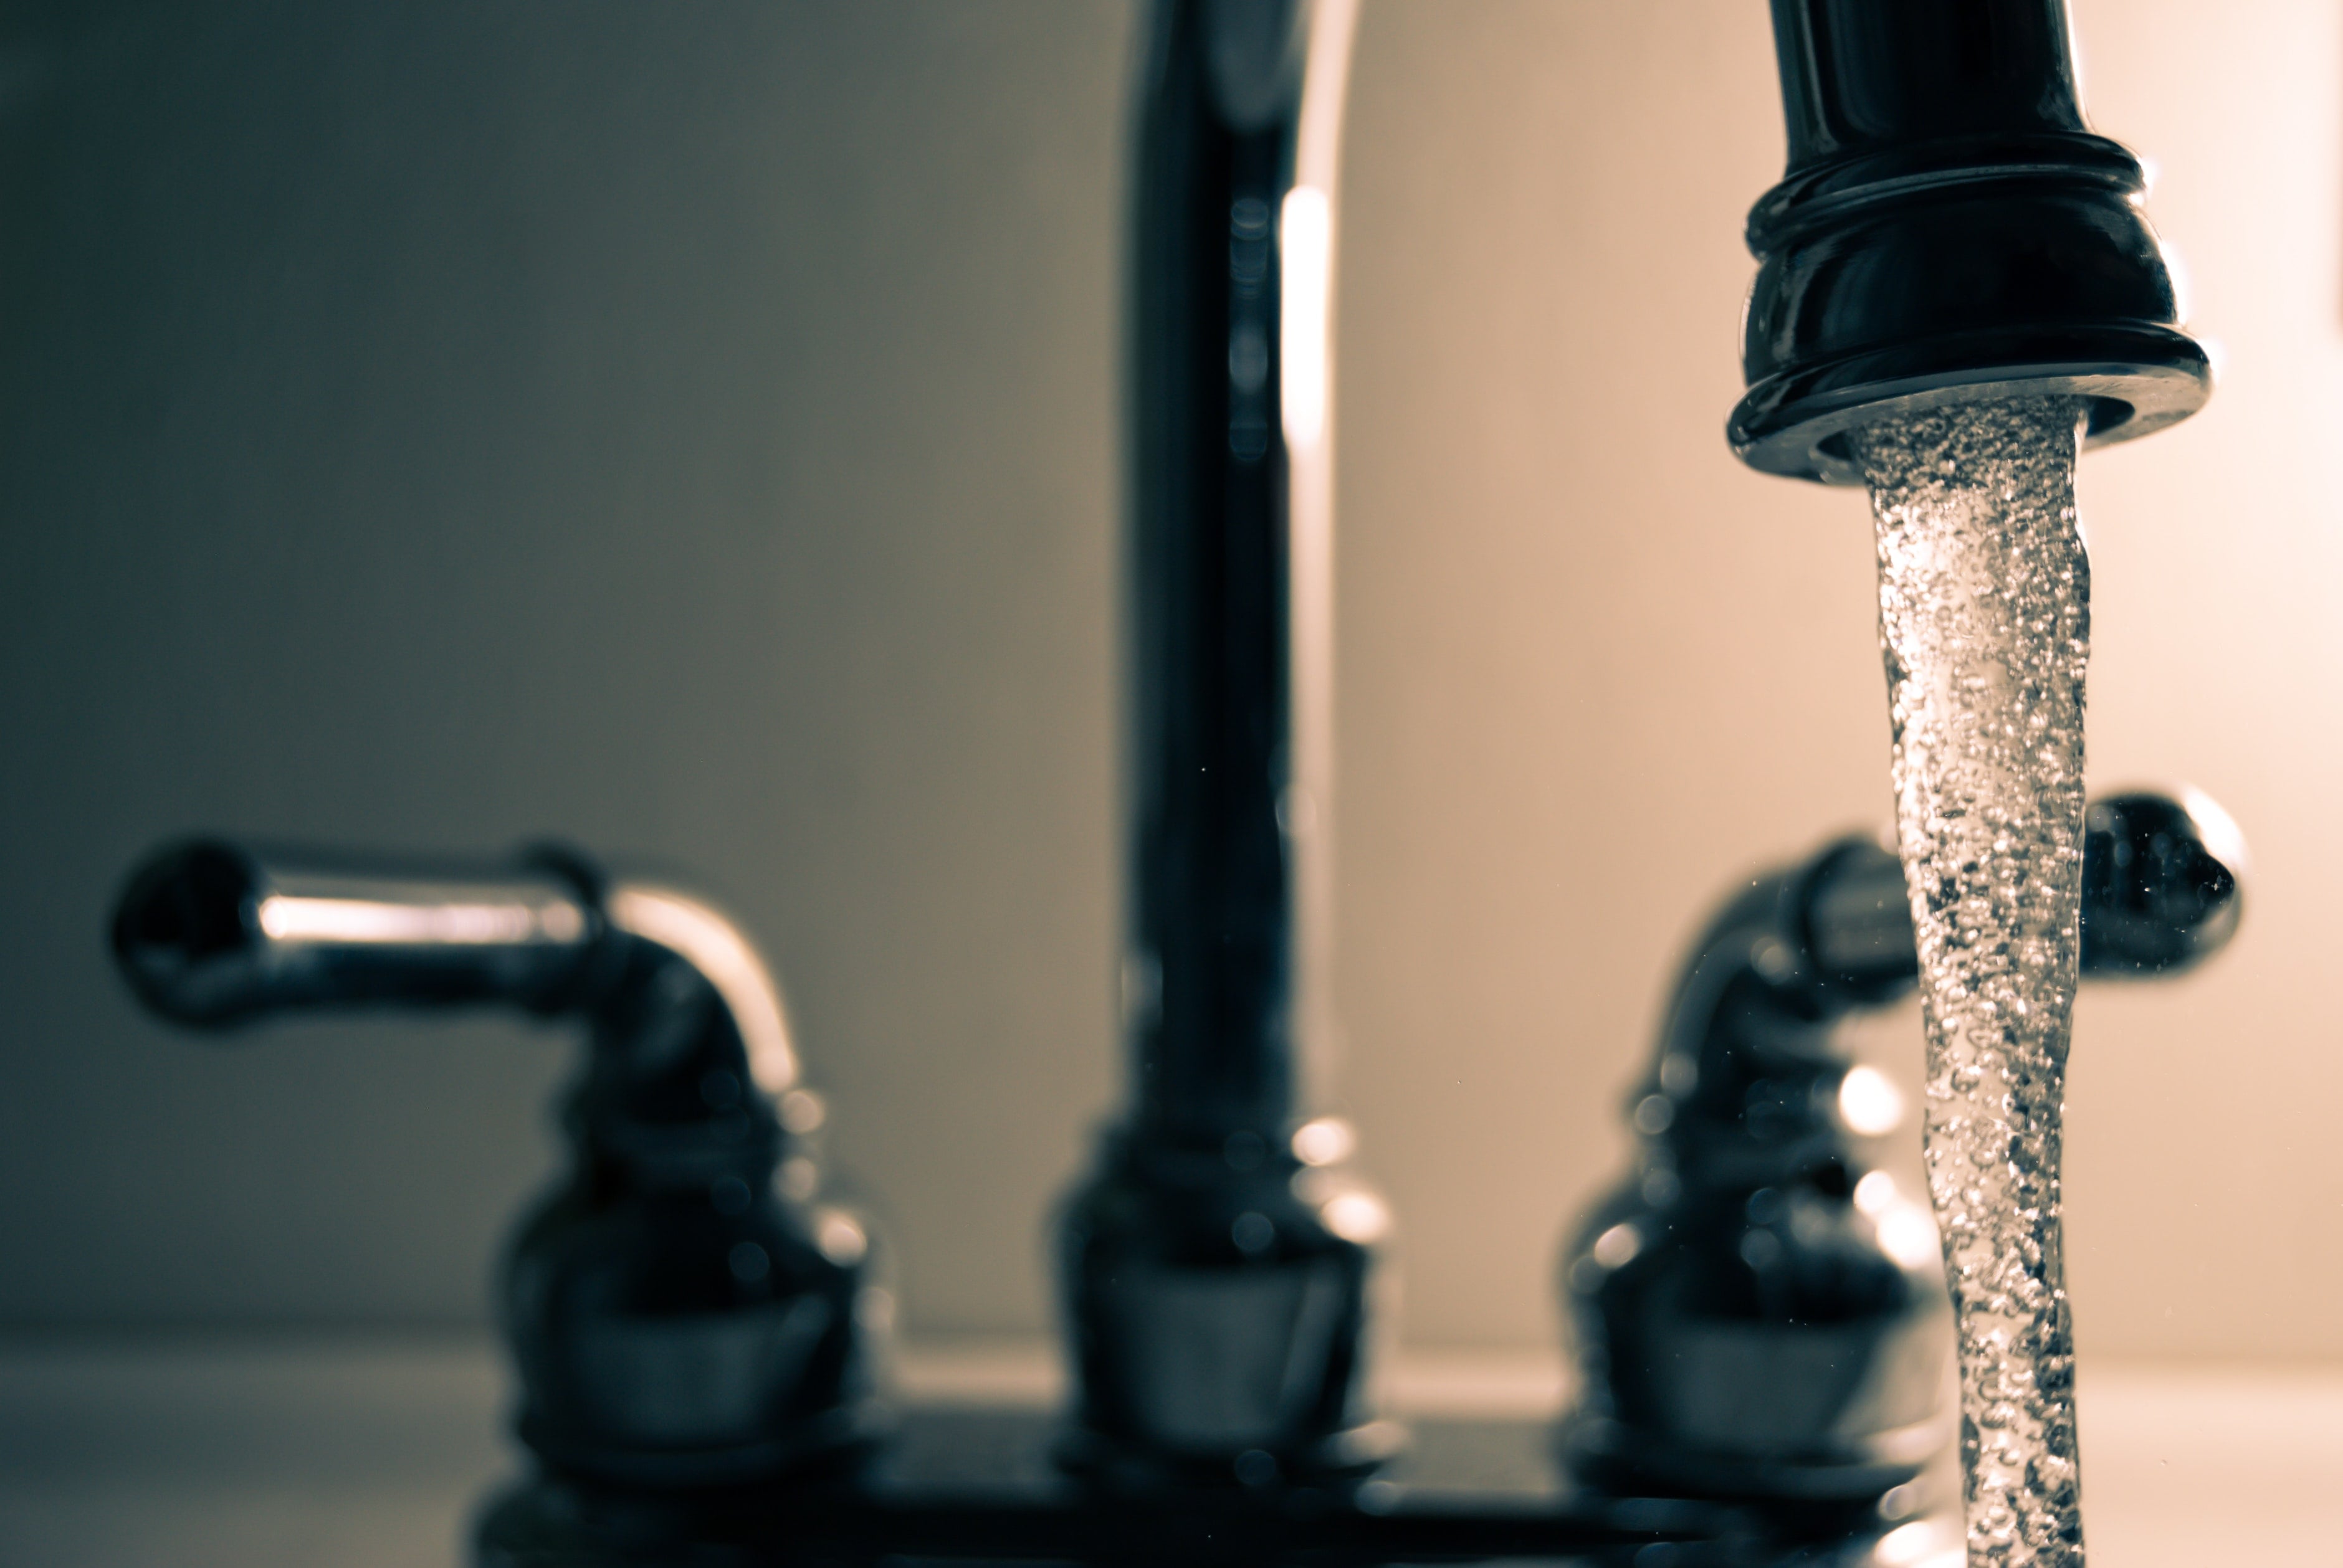 Want to conserve up to 5 gallons of water a day? Fix your leaking faucet.